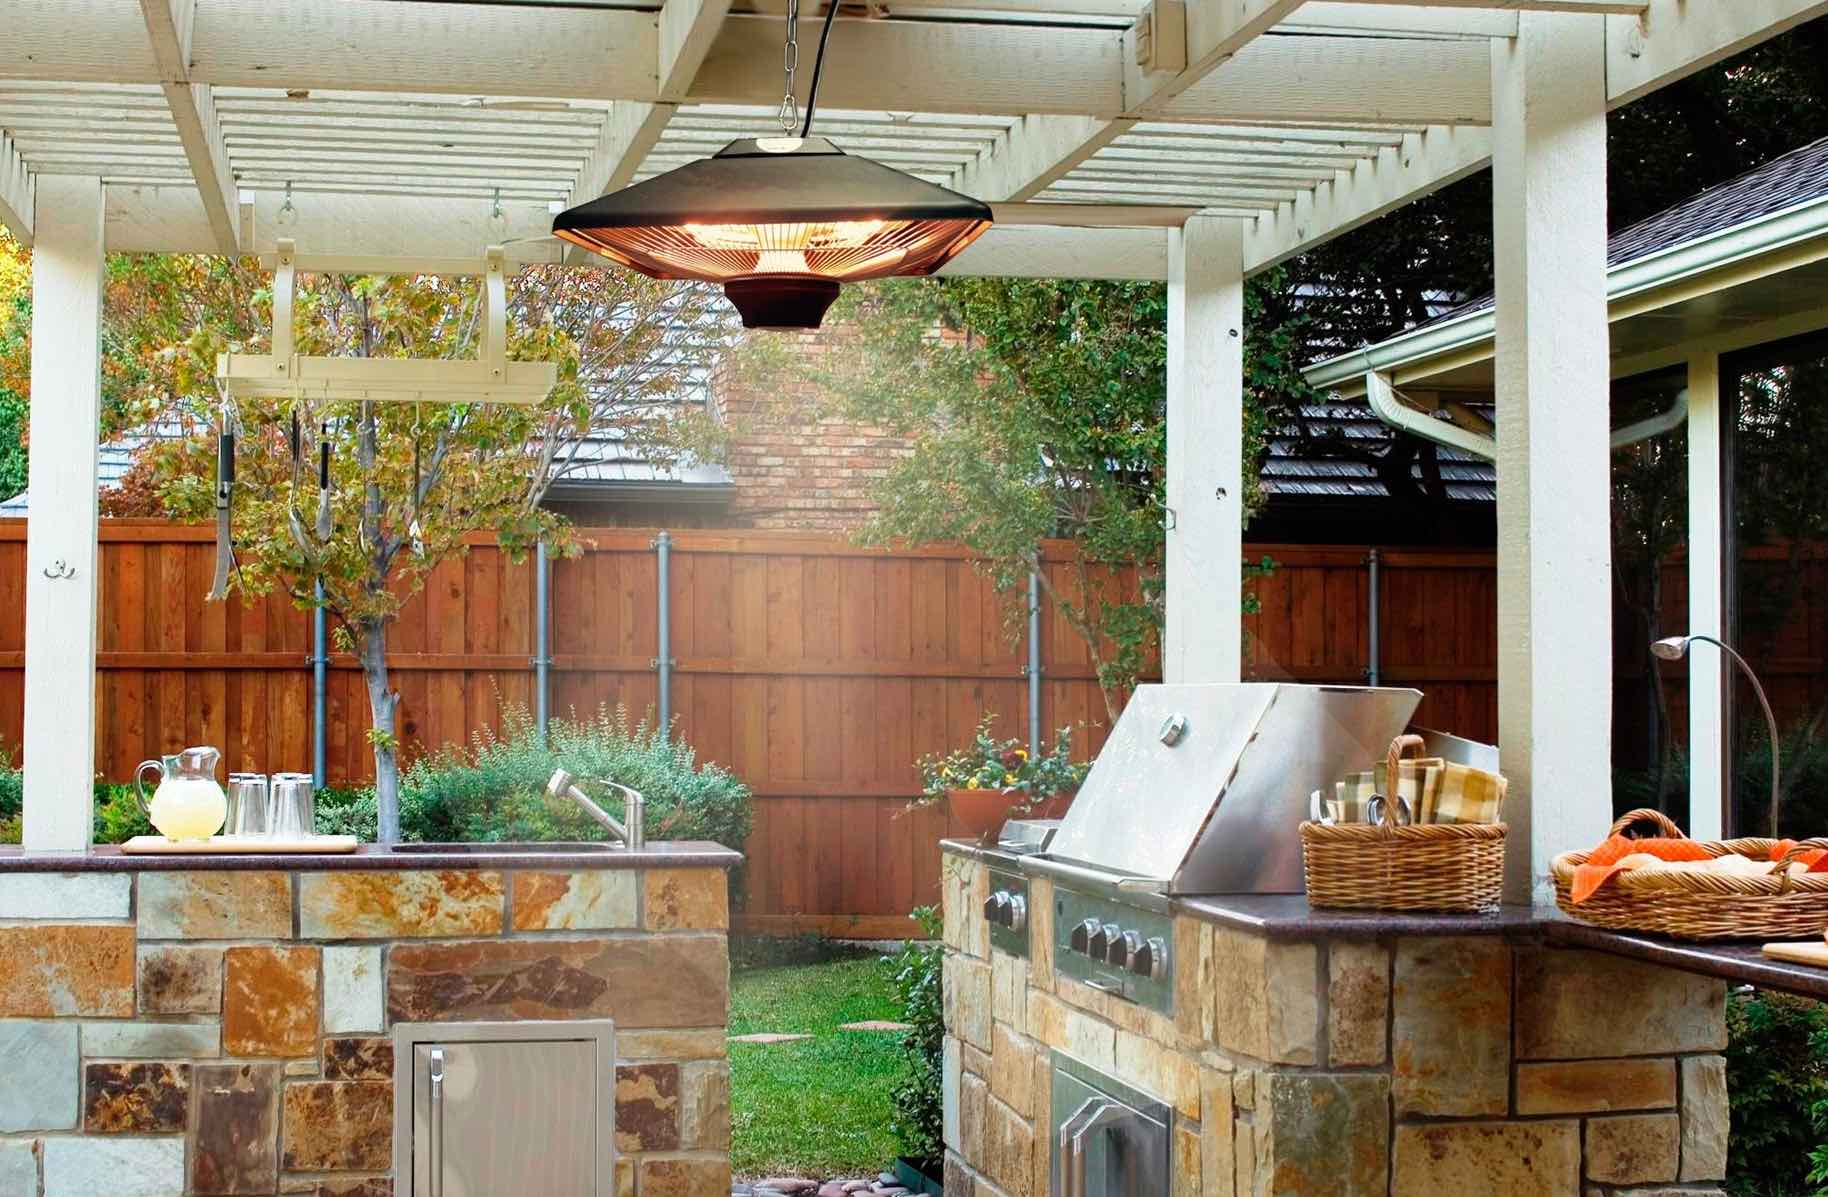 warm up the patio with outdoor heaters